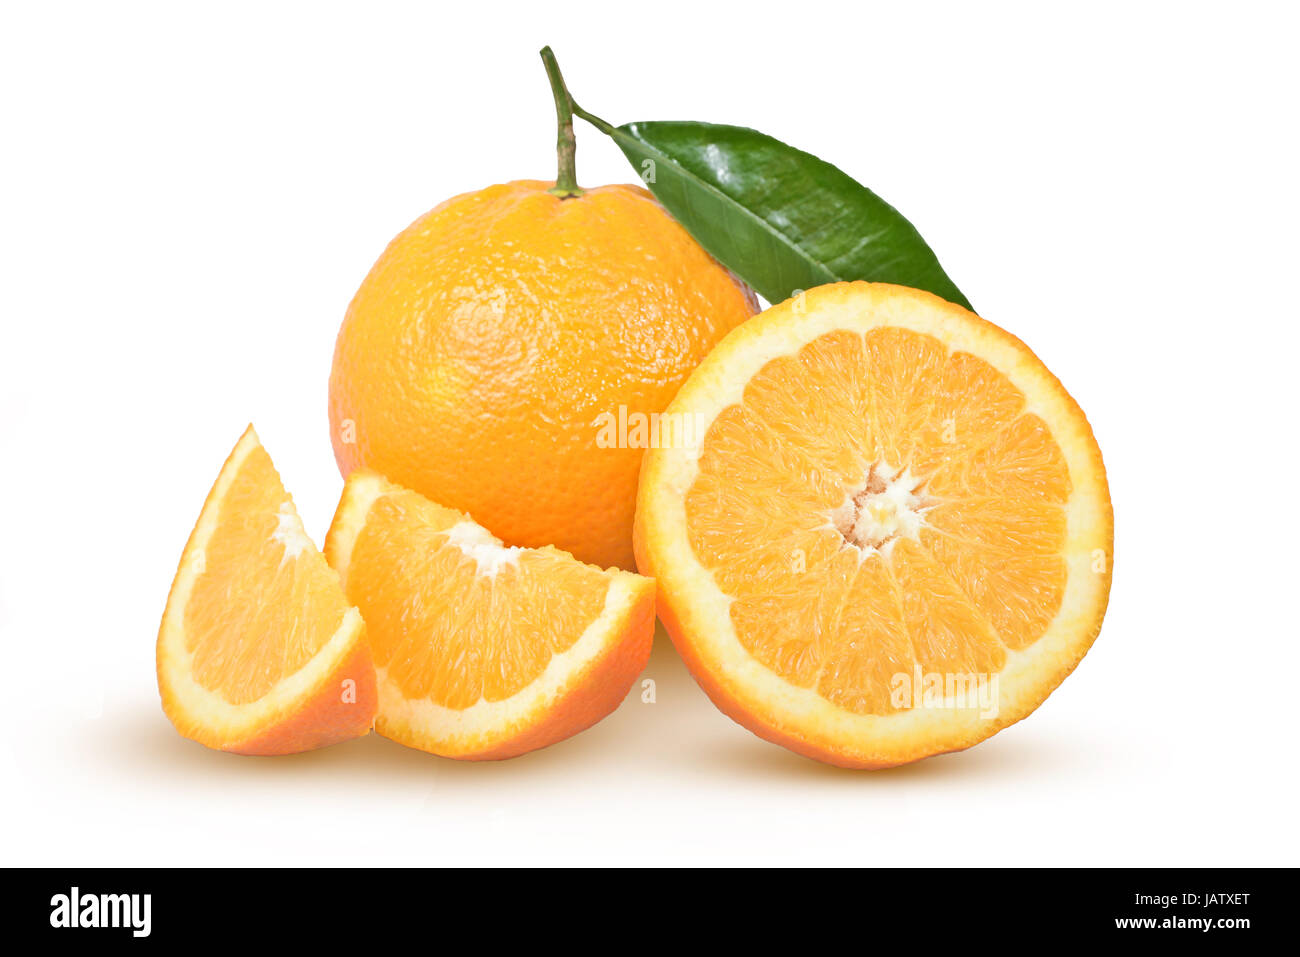 ripe oranges with a green leaf on a white background Stock Photo